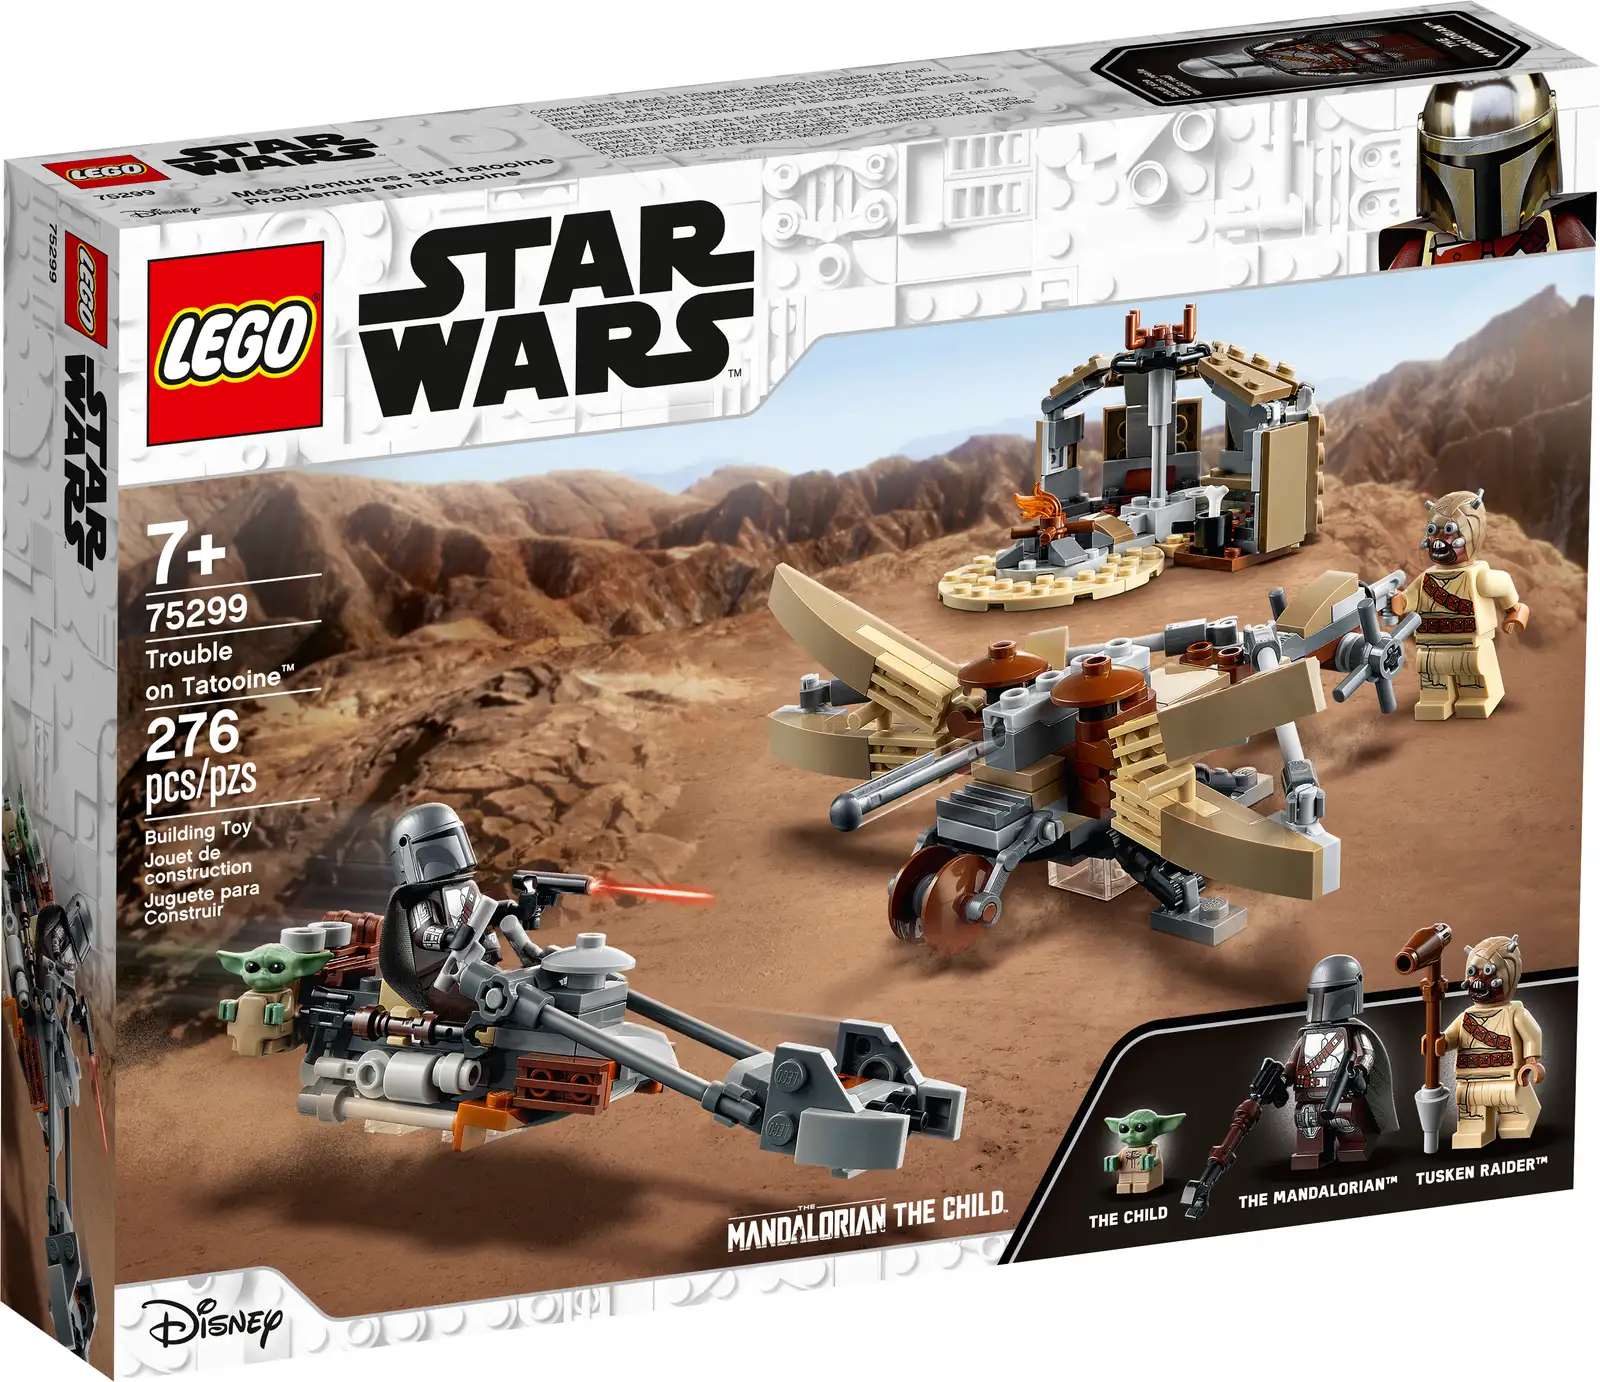 Children will love teaming up with The Mandalorian and a Tusken Raider for desert missions with this LEGO® Star Wars™ Trouble on Tatooine set (75299). It features The Mandalorian’s speeder bike with a LEGO minifigure seat and saddlebag for the Child to sit in, plus a buildable Tusken hut and a new-for-January-2021, missile-shooting ballista for the Tusken Raider. Role-play action This awesome kids’ building toy includes The Mandalorian and Tusken Raider LEGO minifigures, a LEGO figure of the Child (affectionately known as Baby Yoda), plus cool weapons to inspire hours of role-play fun. A great gift idea for young Star Wars: The Mandalorian fans, it comes with clear instructions so even LEGO first-timers can enjoy the building experience. Galaxy of delights Since 1999, the LEGO Group has been recreating iconic starships, vehicles, locations and characters from the Star Wars universe. LEGO Star Wars has become its most successful theme with a huge variety of sets to excite fans of all ages. Kids can recreate scenes from Star Wars: The Mandalorian Season 2 and play out their own speeder-bike-riding, missile-shooting battle stories with this Trouble on Tatooine (75299) building toy. Includes The Mandalorian and Tusken Raider LEGO® minifigures, each with weapons for role-play battles, plus a LEGO figure of the Child (the popular character affectionately known as Baby Yoda). The speeder has a LEGO® minifigure seat and saddlebag for the Child to sit in. The set also features a buildable Tusken hut hideout and spring-loaded, missile-shooting ballista for the Tusken Raider. Great for solo building and play or for sharing the fun with friends, this awesome construction toy makes the best birthday present, holiday gift or surprise treat for creative kids aged 7 and up. The speeder measures over 1.5 in. (3 cm) high, 5 in. (13 cm) long and 1.5 in. (3 cm) wide, and this complete set combines brilliantly with other LEGO® Star Wars™ buildable playsets for creative play. Thinking of buying this 277-piece set for a newcomer to LEGO® building? No worries. It comes with easy-to-follow illustrated instructions so they can build with confidence. There are LEGO® Star Wars™ sets to thrill fans of all ages, whether they want to recreate famous scenes, role-play their own stories or just build and display the authentic construction models. LEGO® components meet the highest industry standards to ensure they are consistent and compatible for a simple, strong connection every time – it’s been that way since 1958. LEGO® bricks and pieces are tested to the max to make sure they meet stringent safety standards.